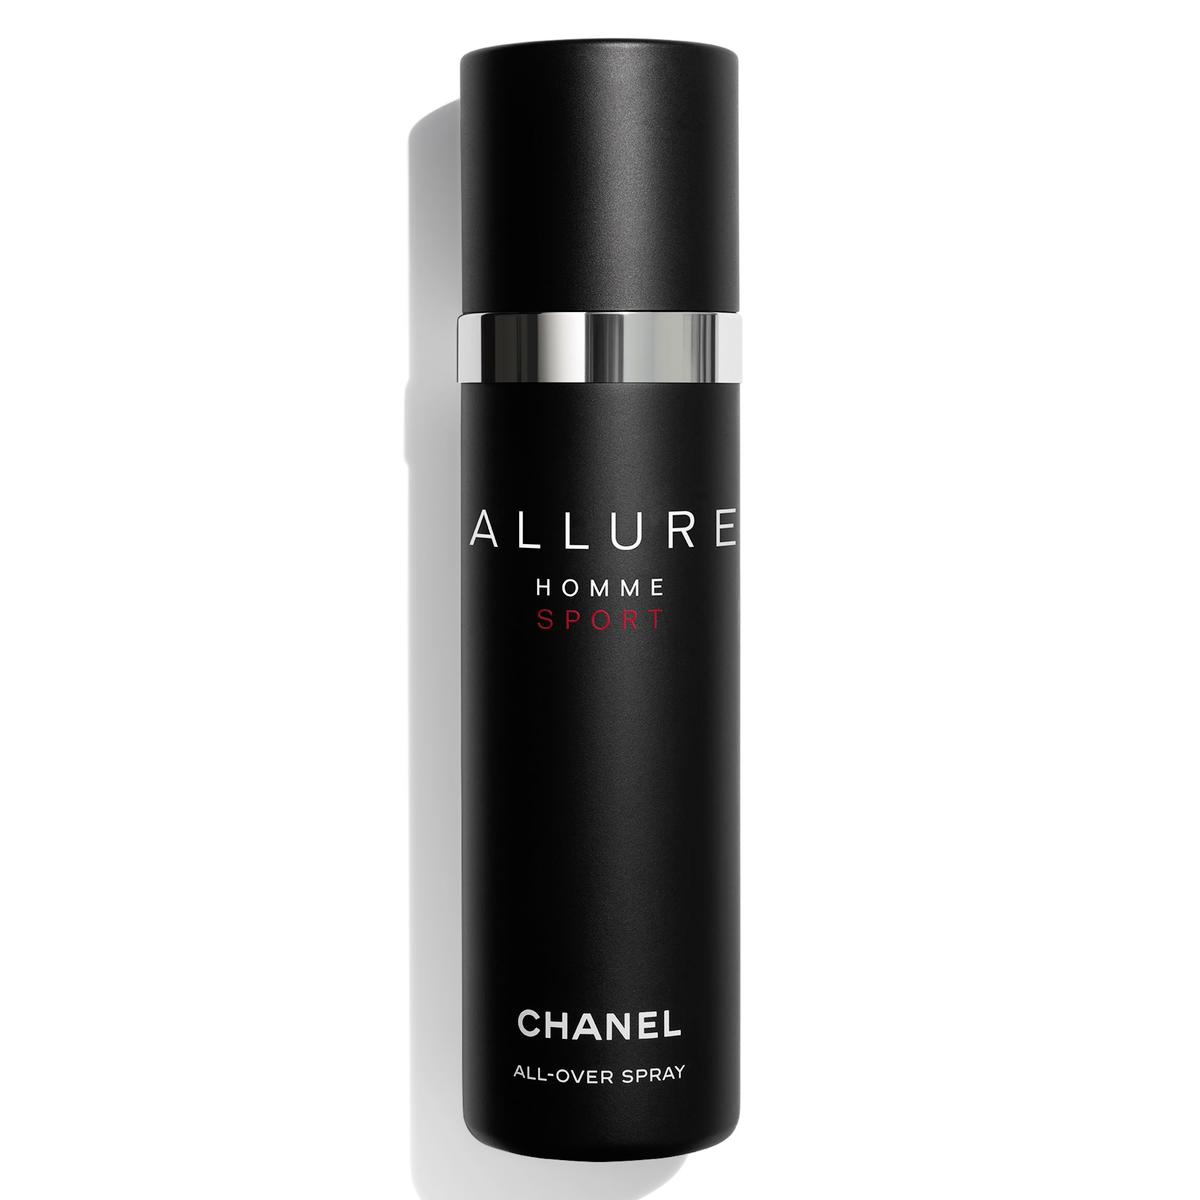 CHANEL ALLURE HOMME SPORT ALL-OVER SPRAY 100 ml - 1